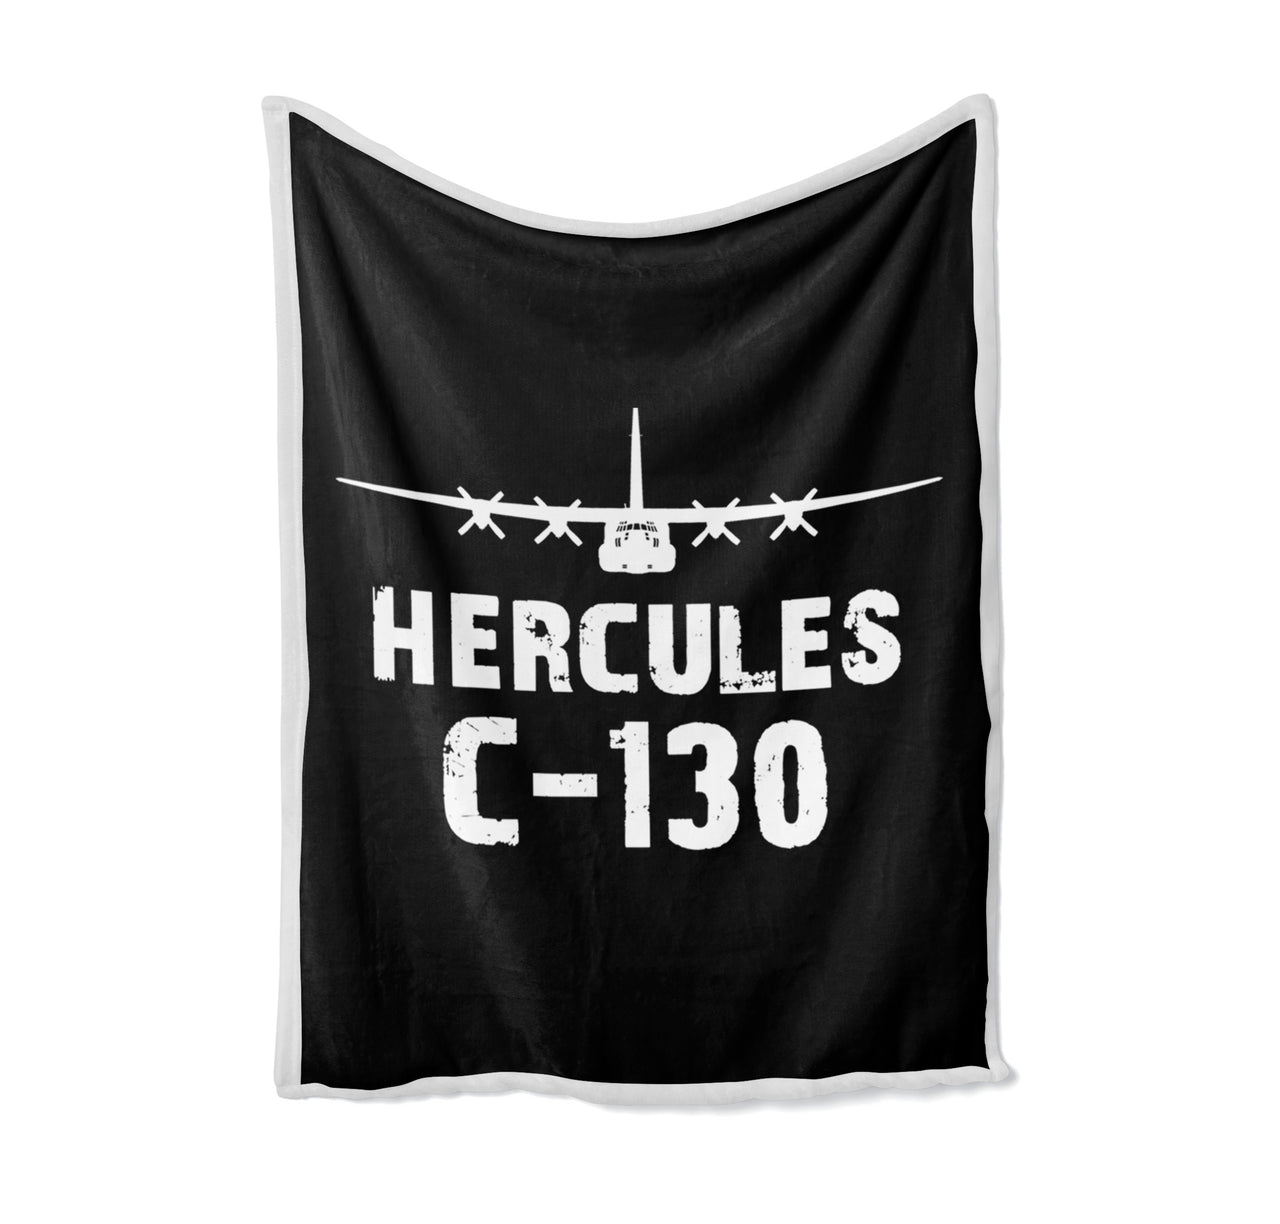 Hercules C-130 & Plane Designed Bed Blankets & Covers